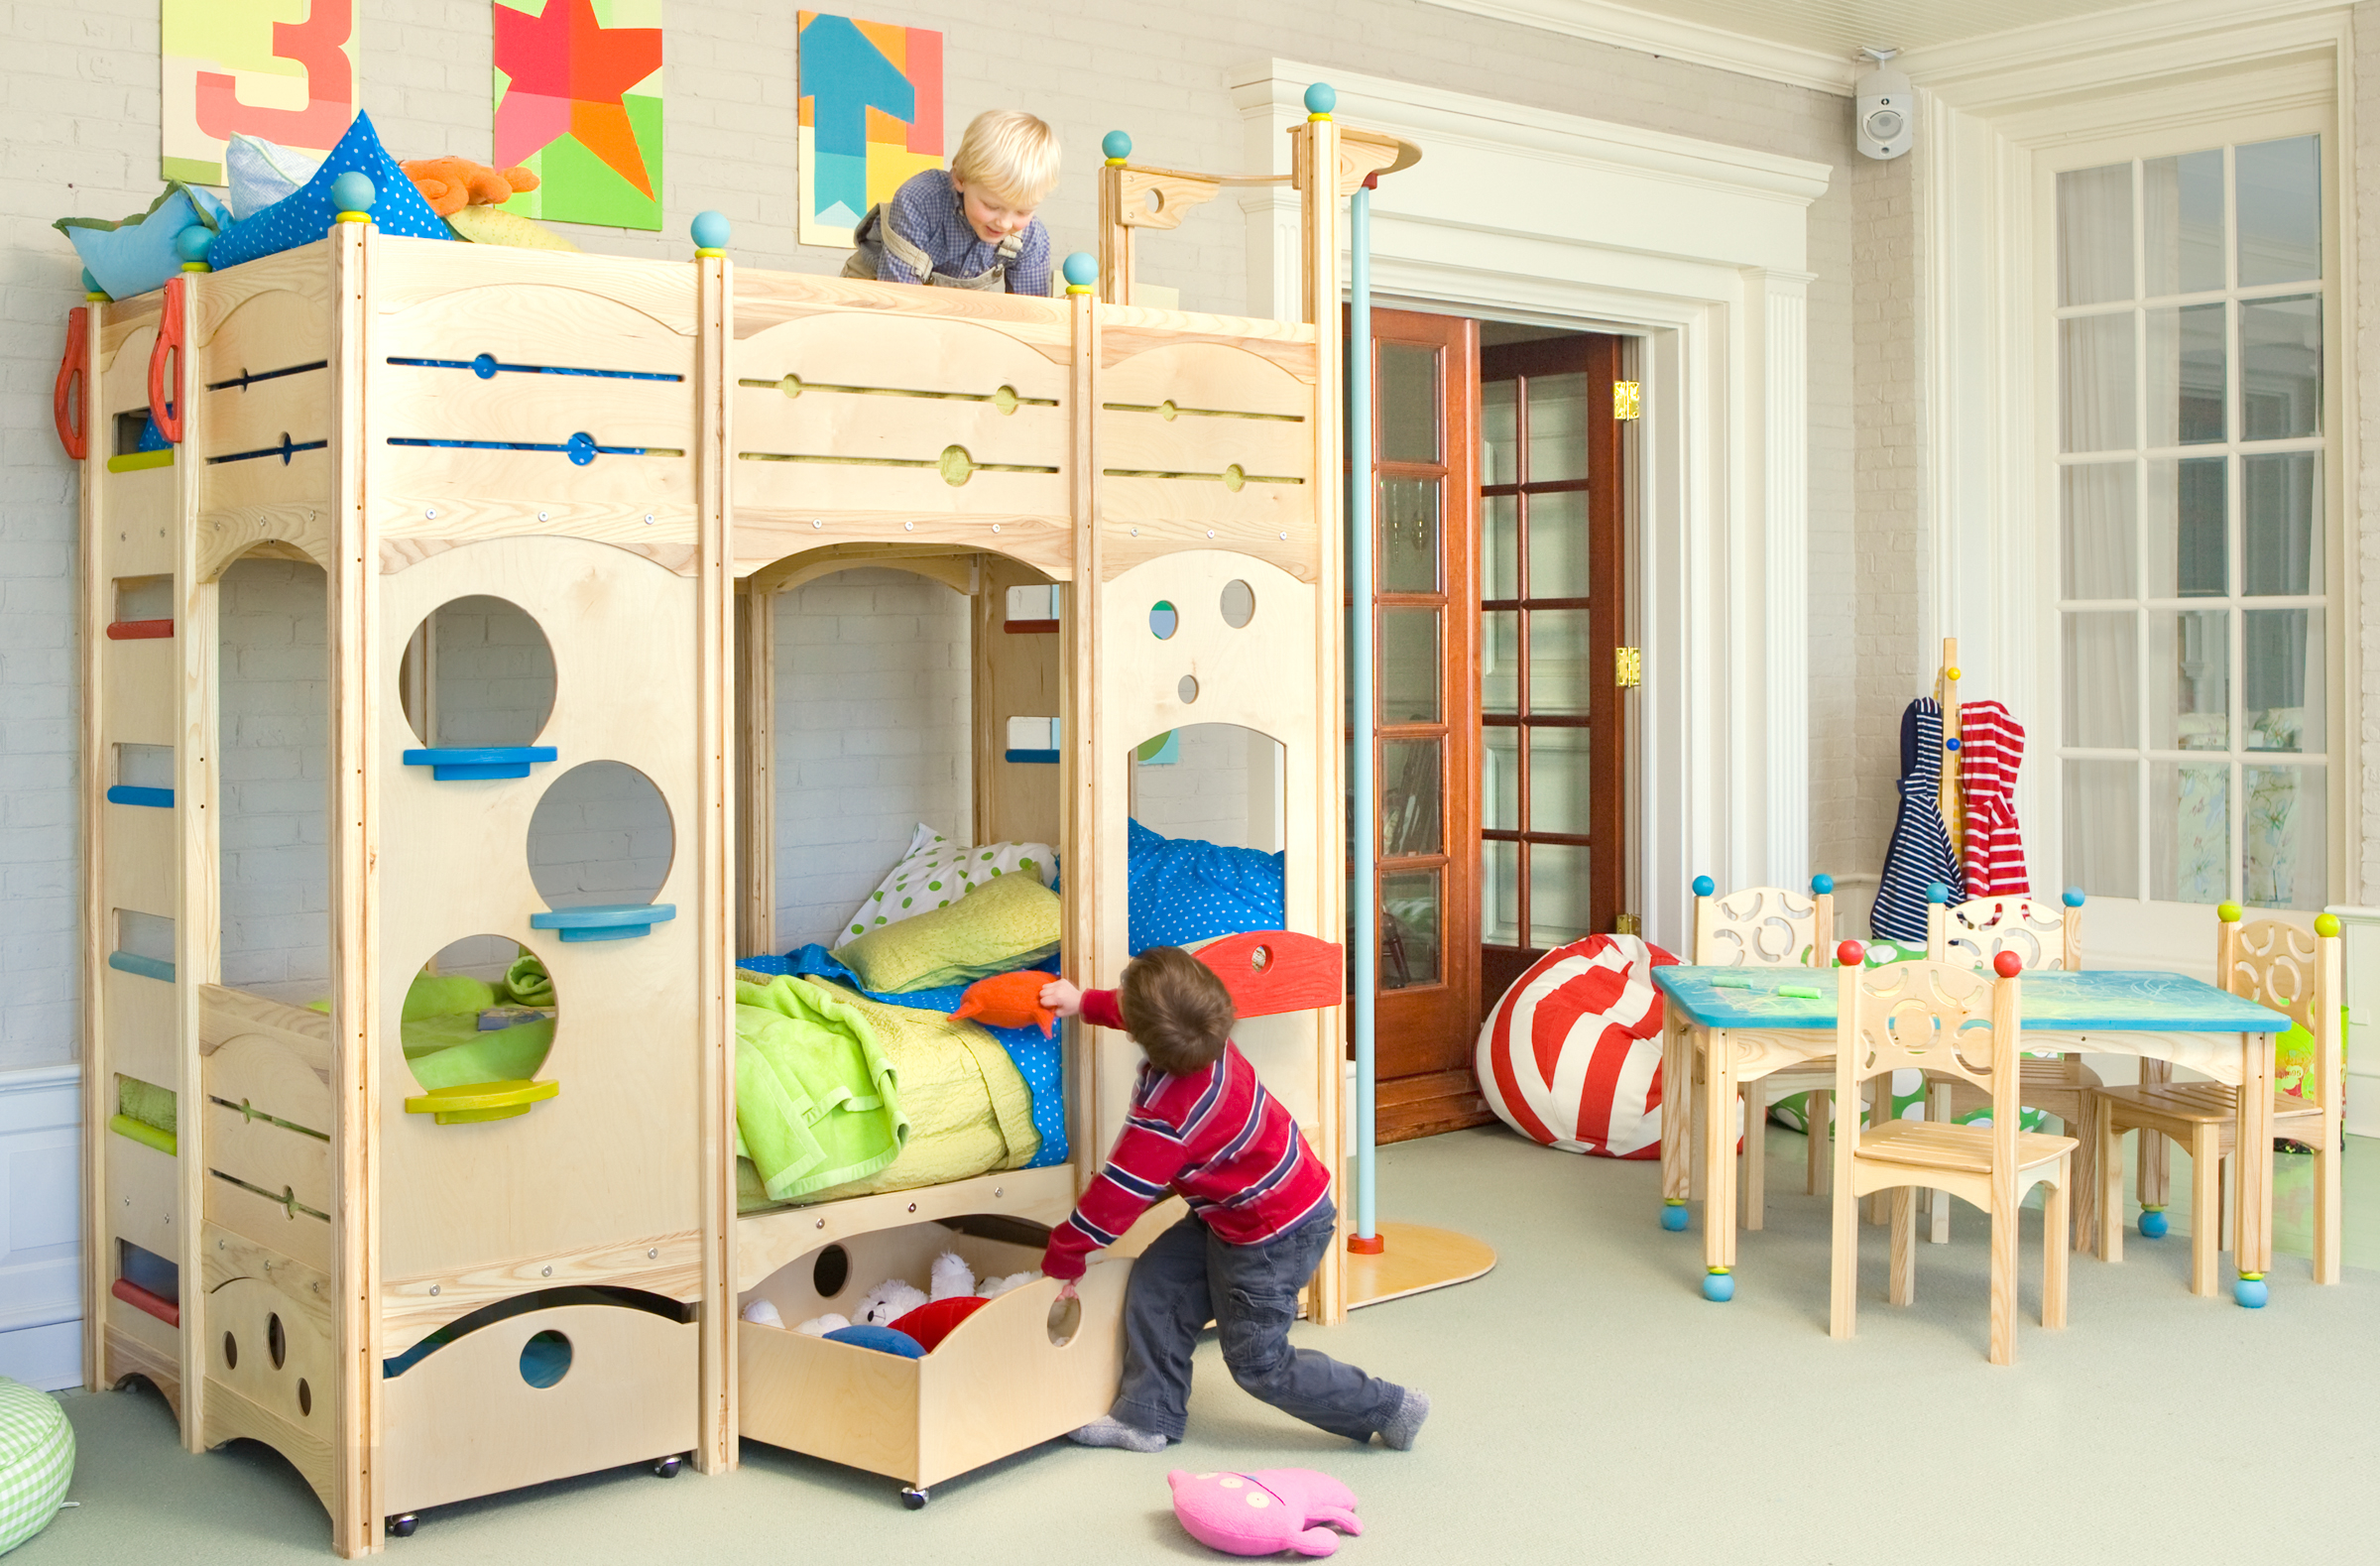 Indoor playhouse for kids 4